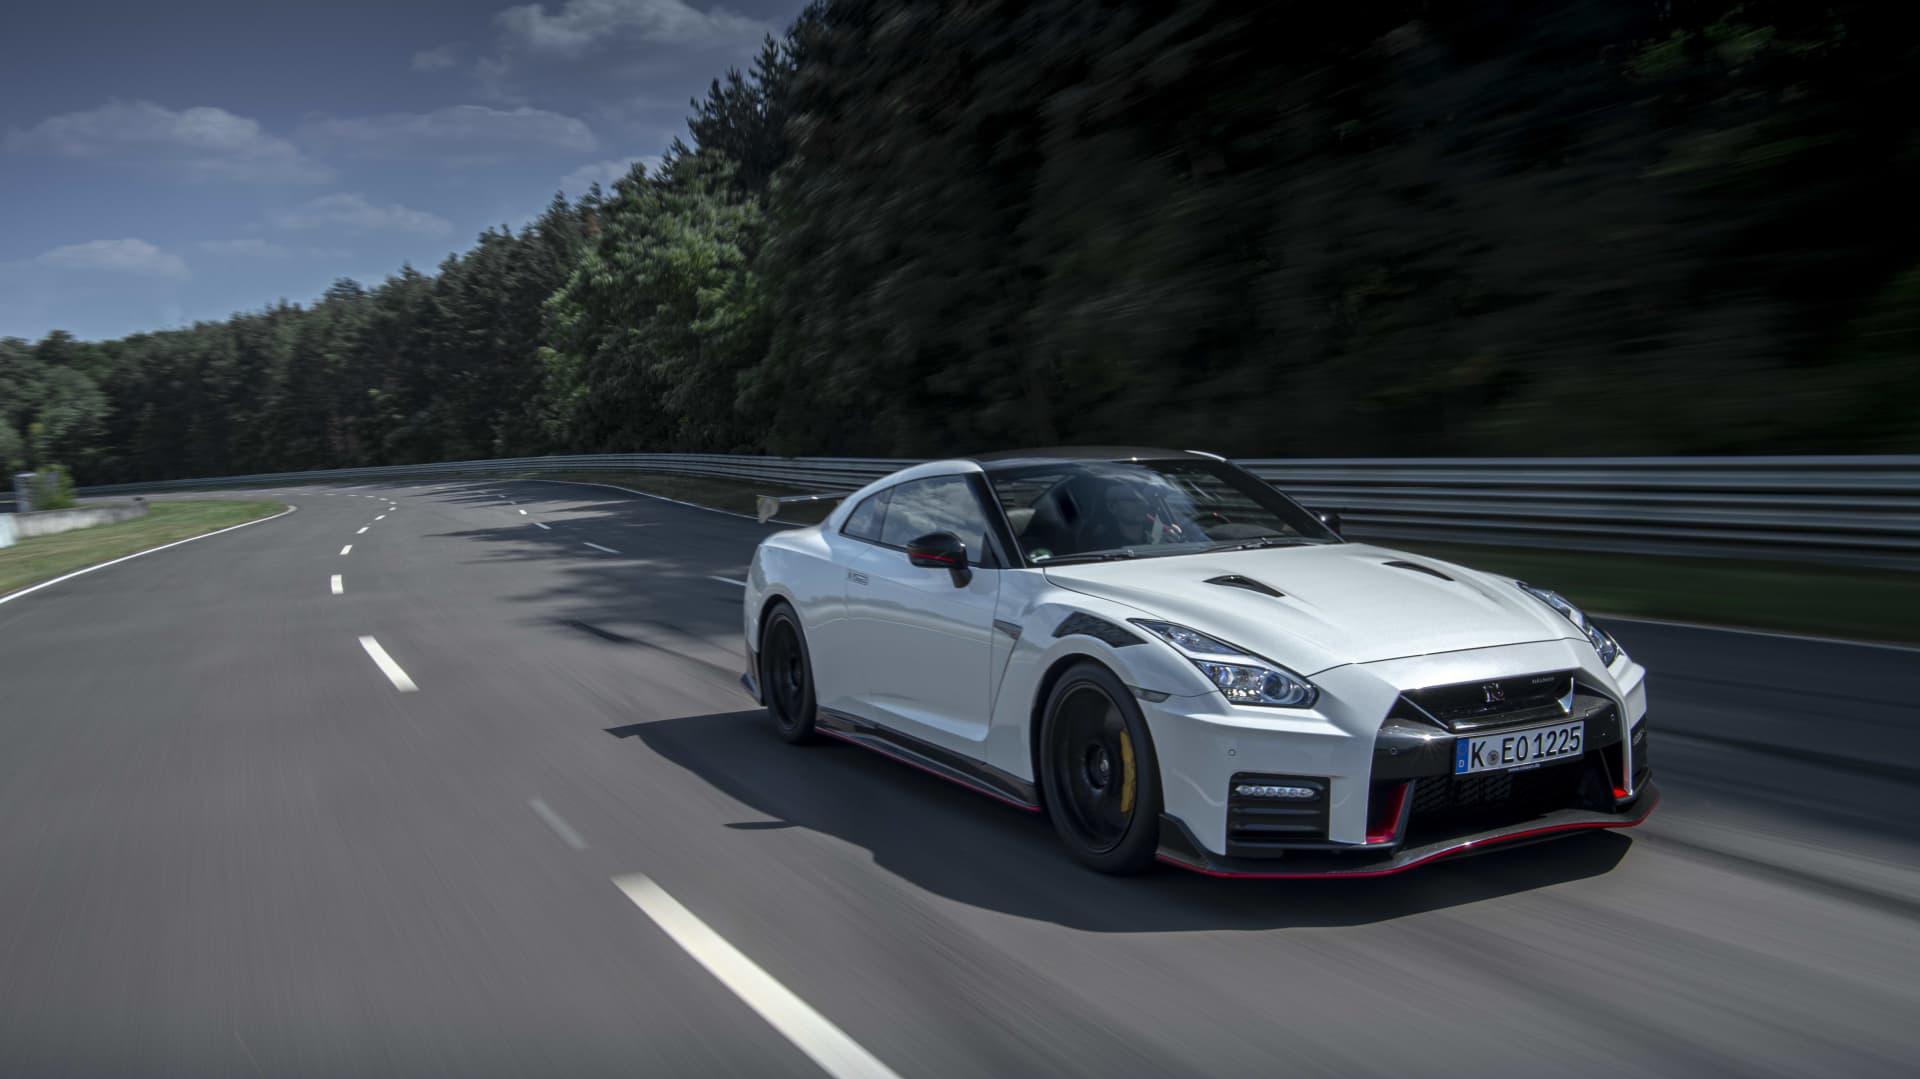  Nissan GT R Nismo Review Power Performance And Handling